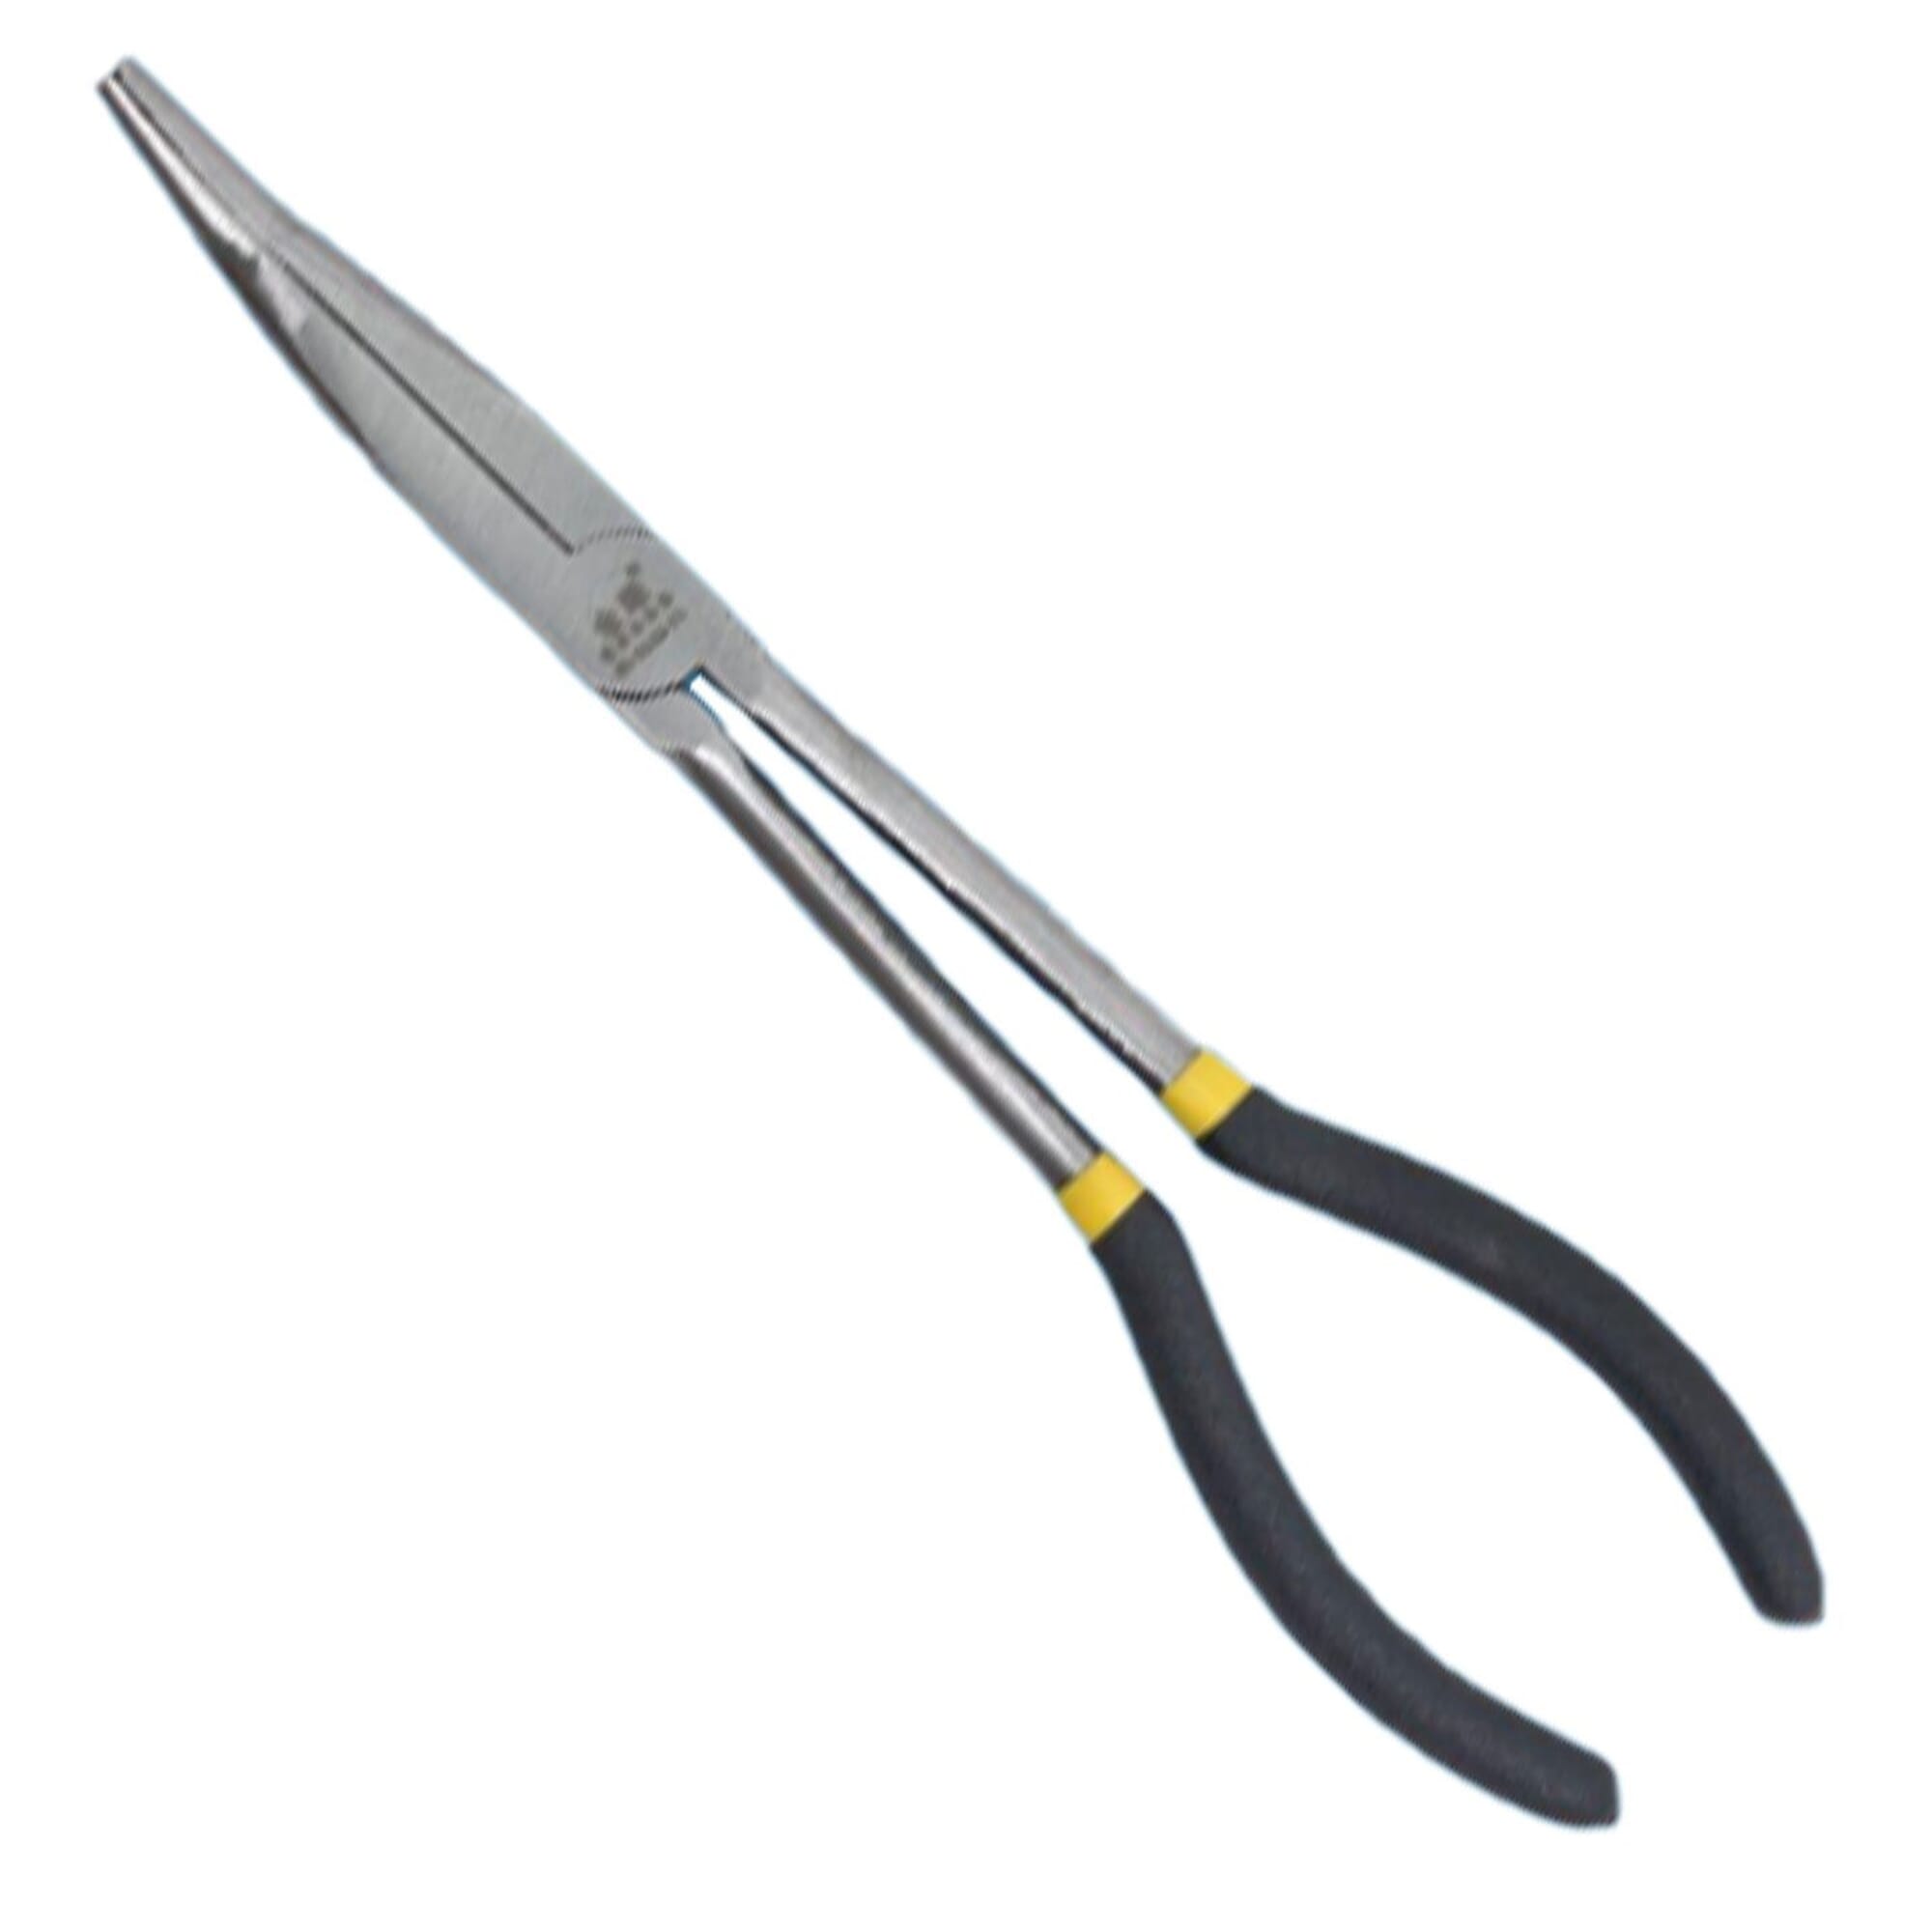 45 Degree Long Reach Angled Bent Needle Nose Pliers Tool, with